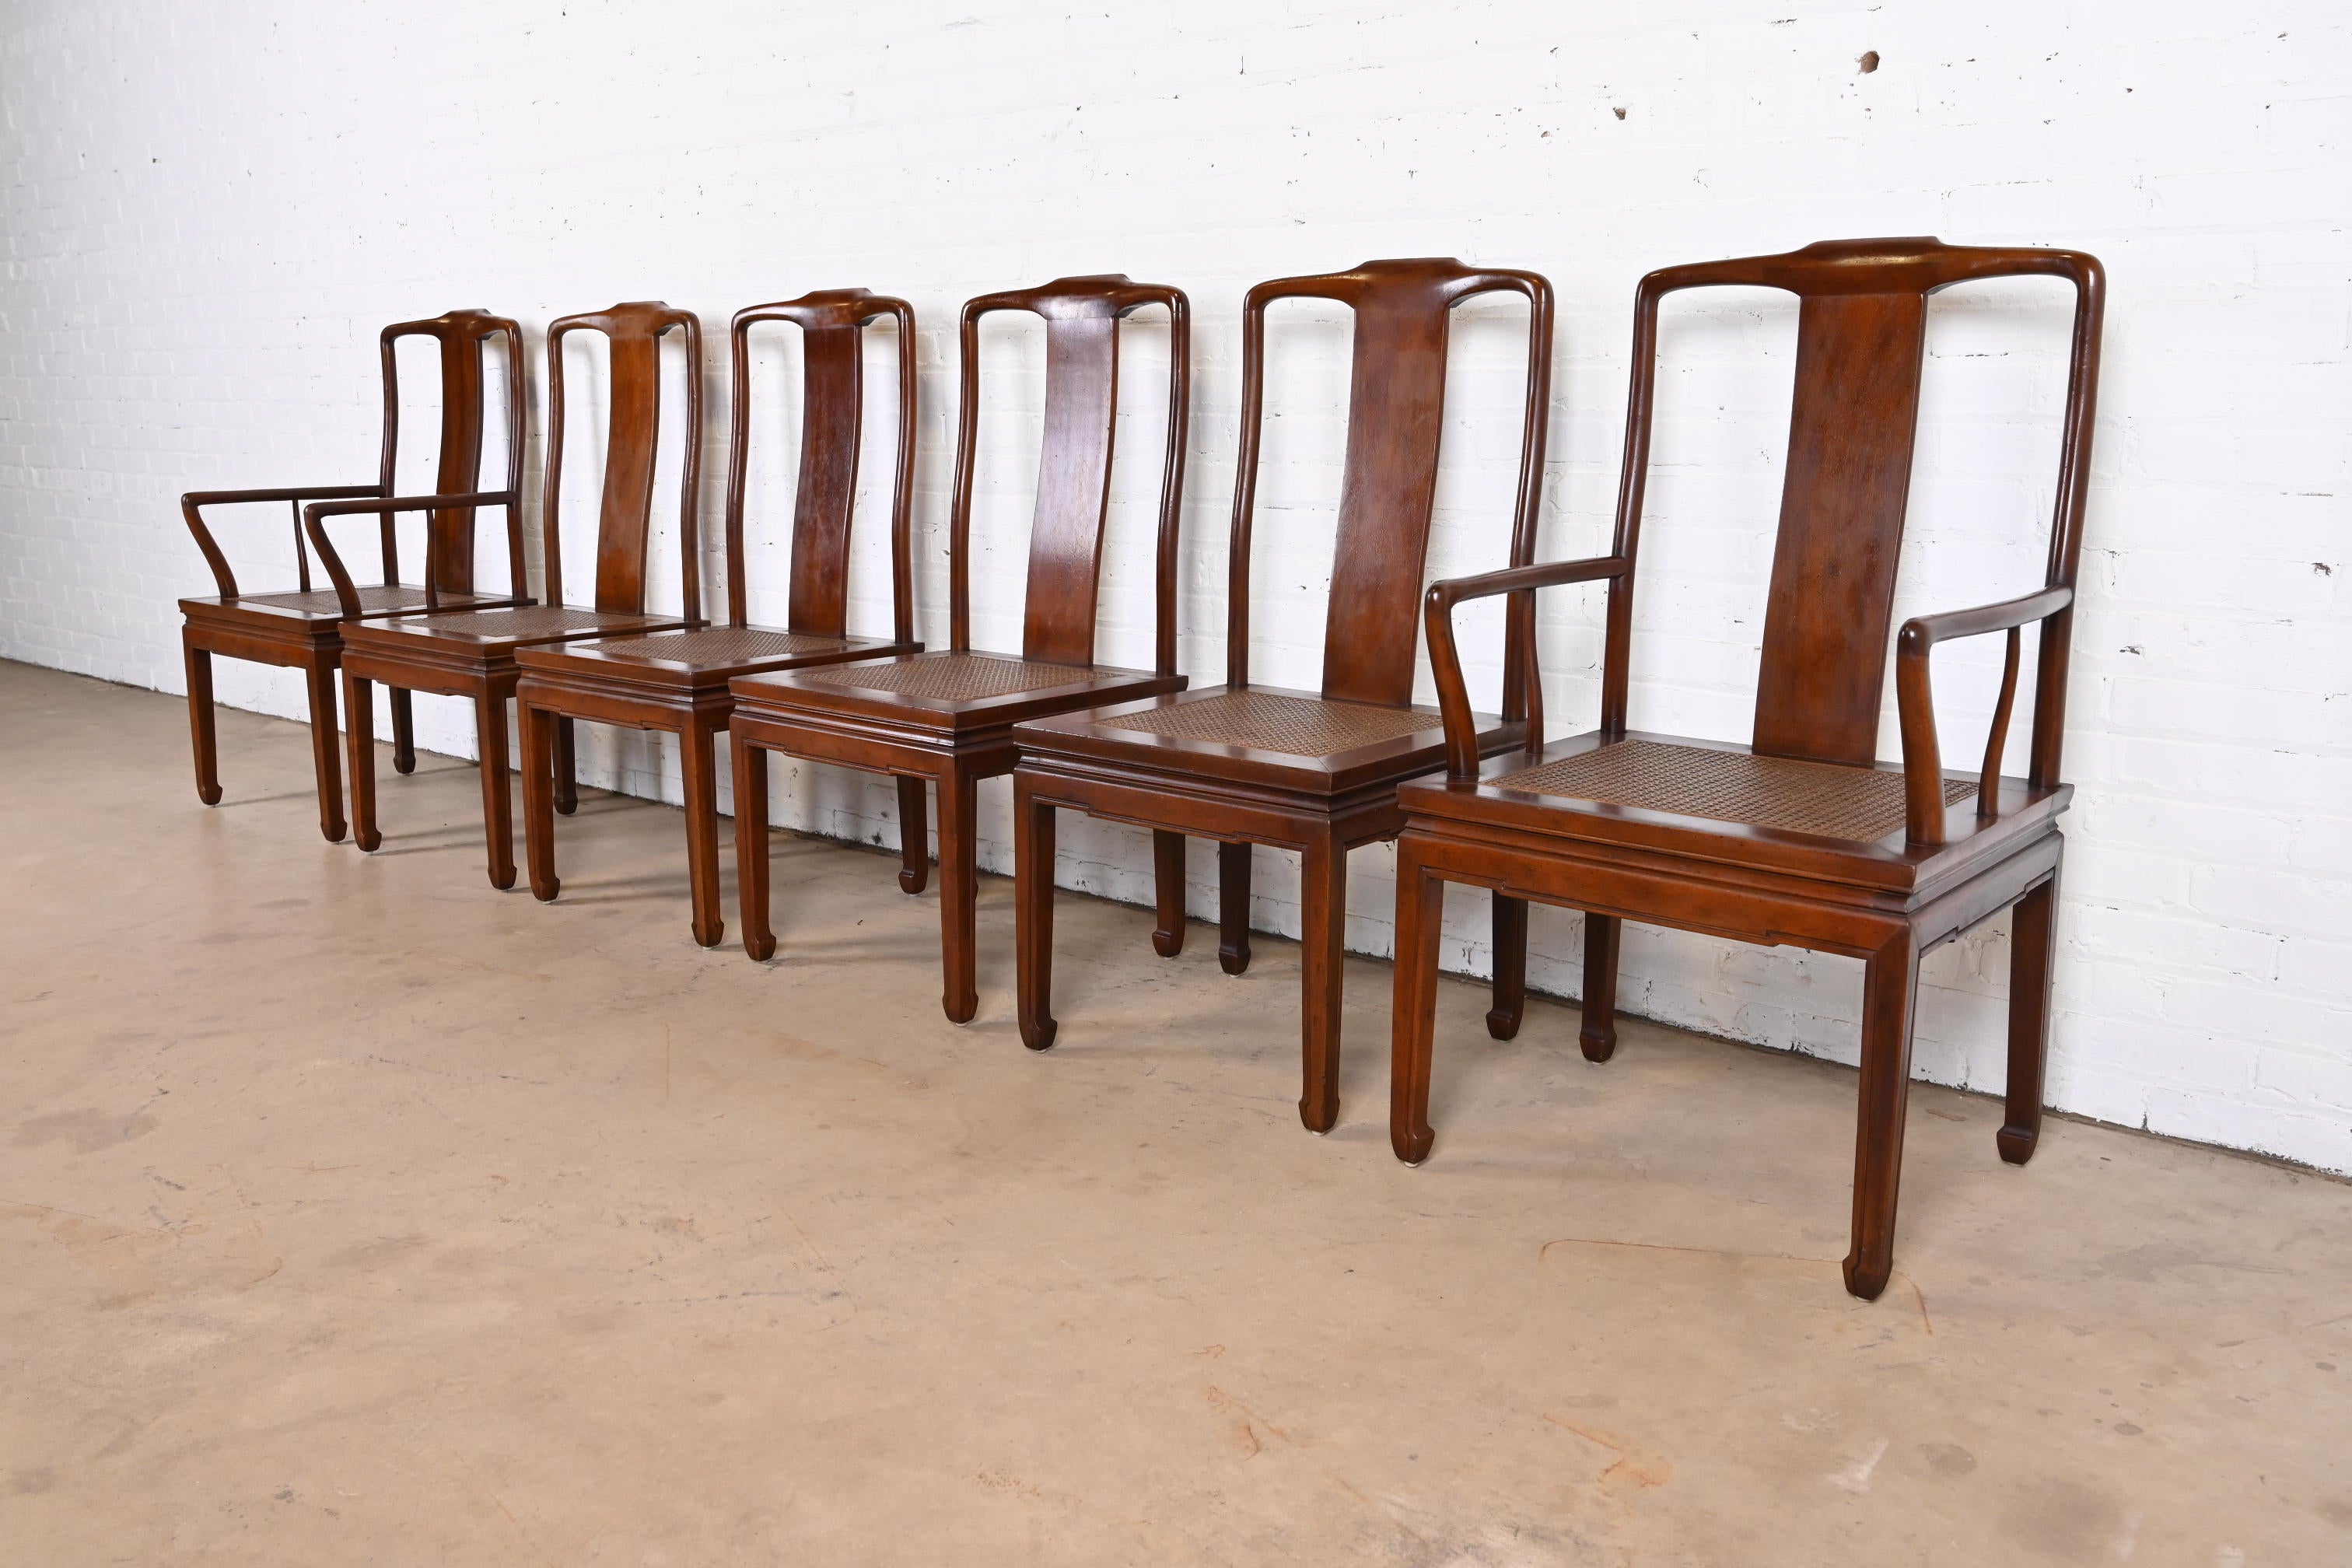 A gorgeous set of six mid-century modern Hollywood Regency Chinoiserie dining chairs

By Henredon

USA, Circa 1970s

Solid carved mahogany frames, with caned seats.

Measures:
Side chairs - 19.5″W x 22″D x 40.5″H. Seat height: 17.5″H
Armchairs -